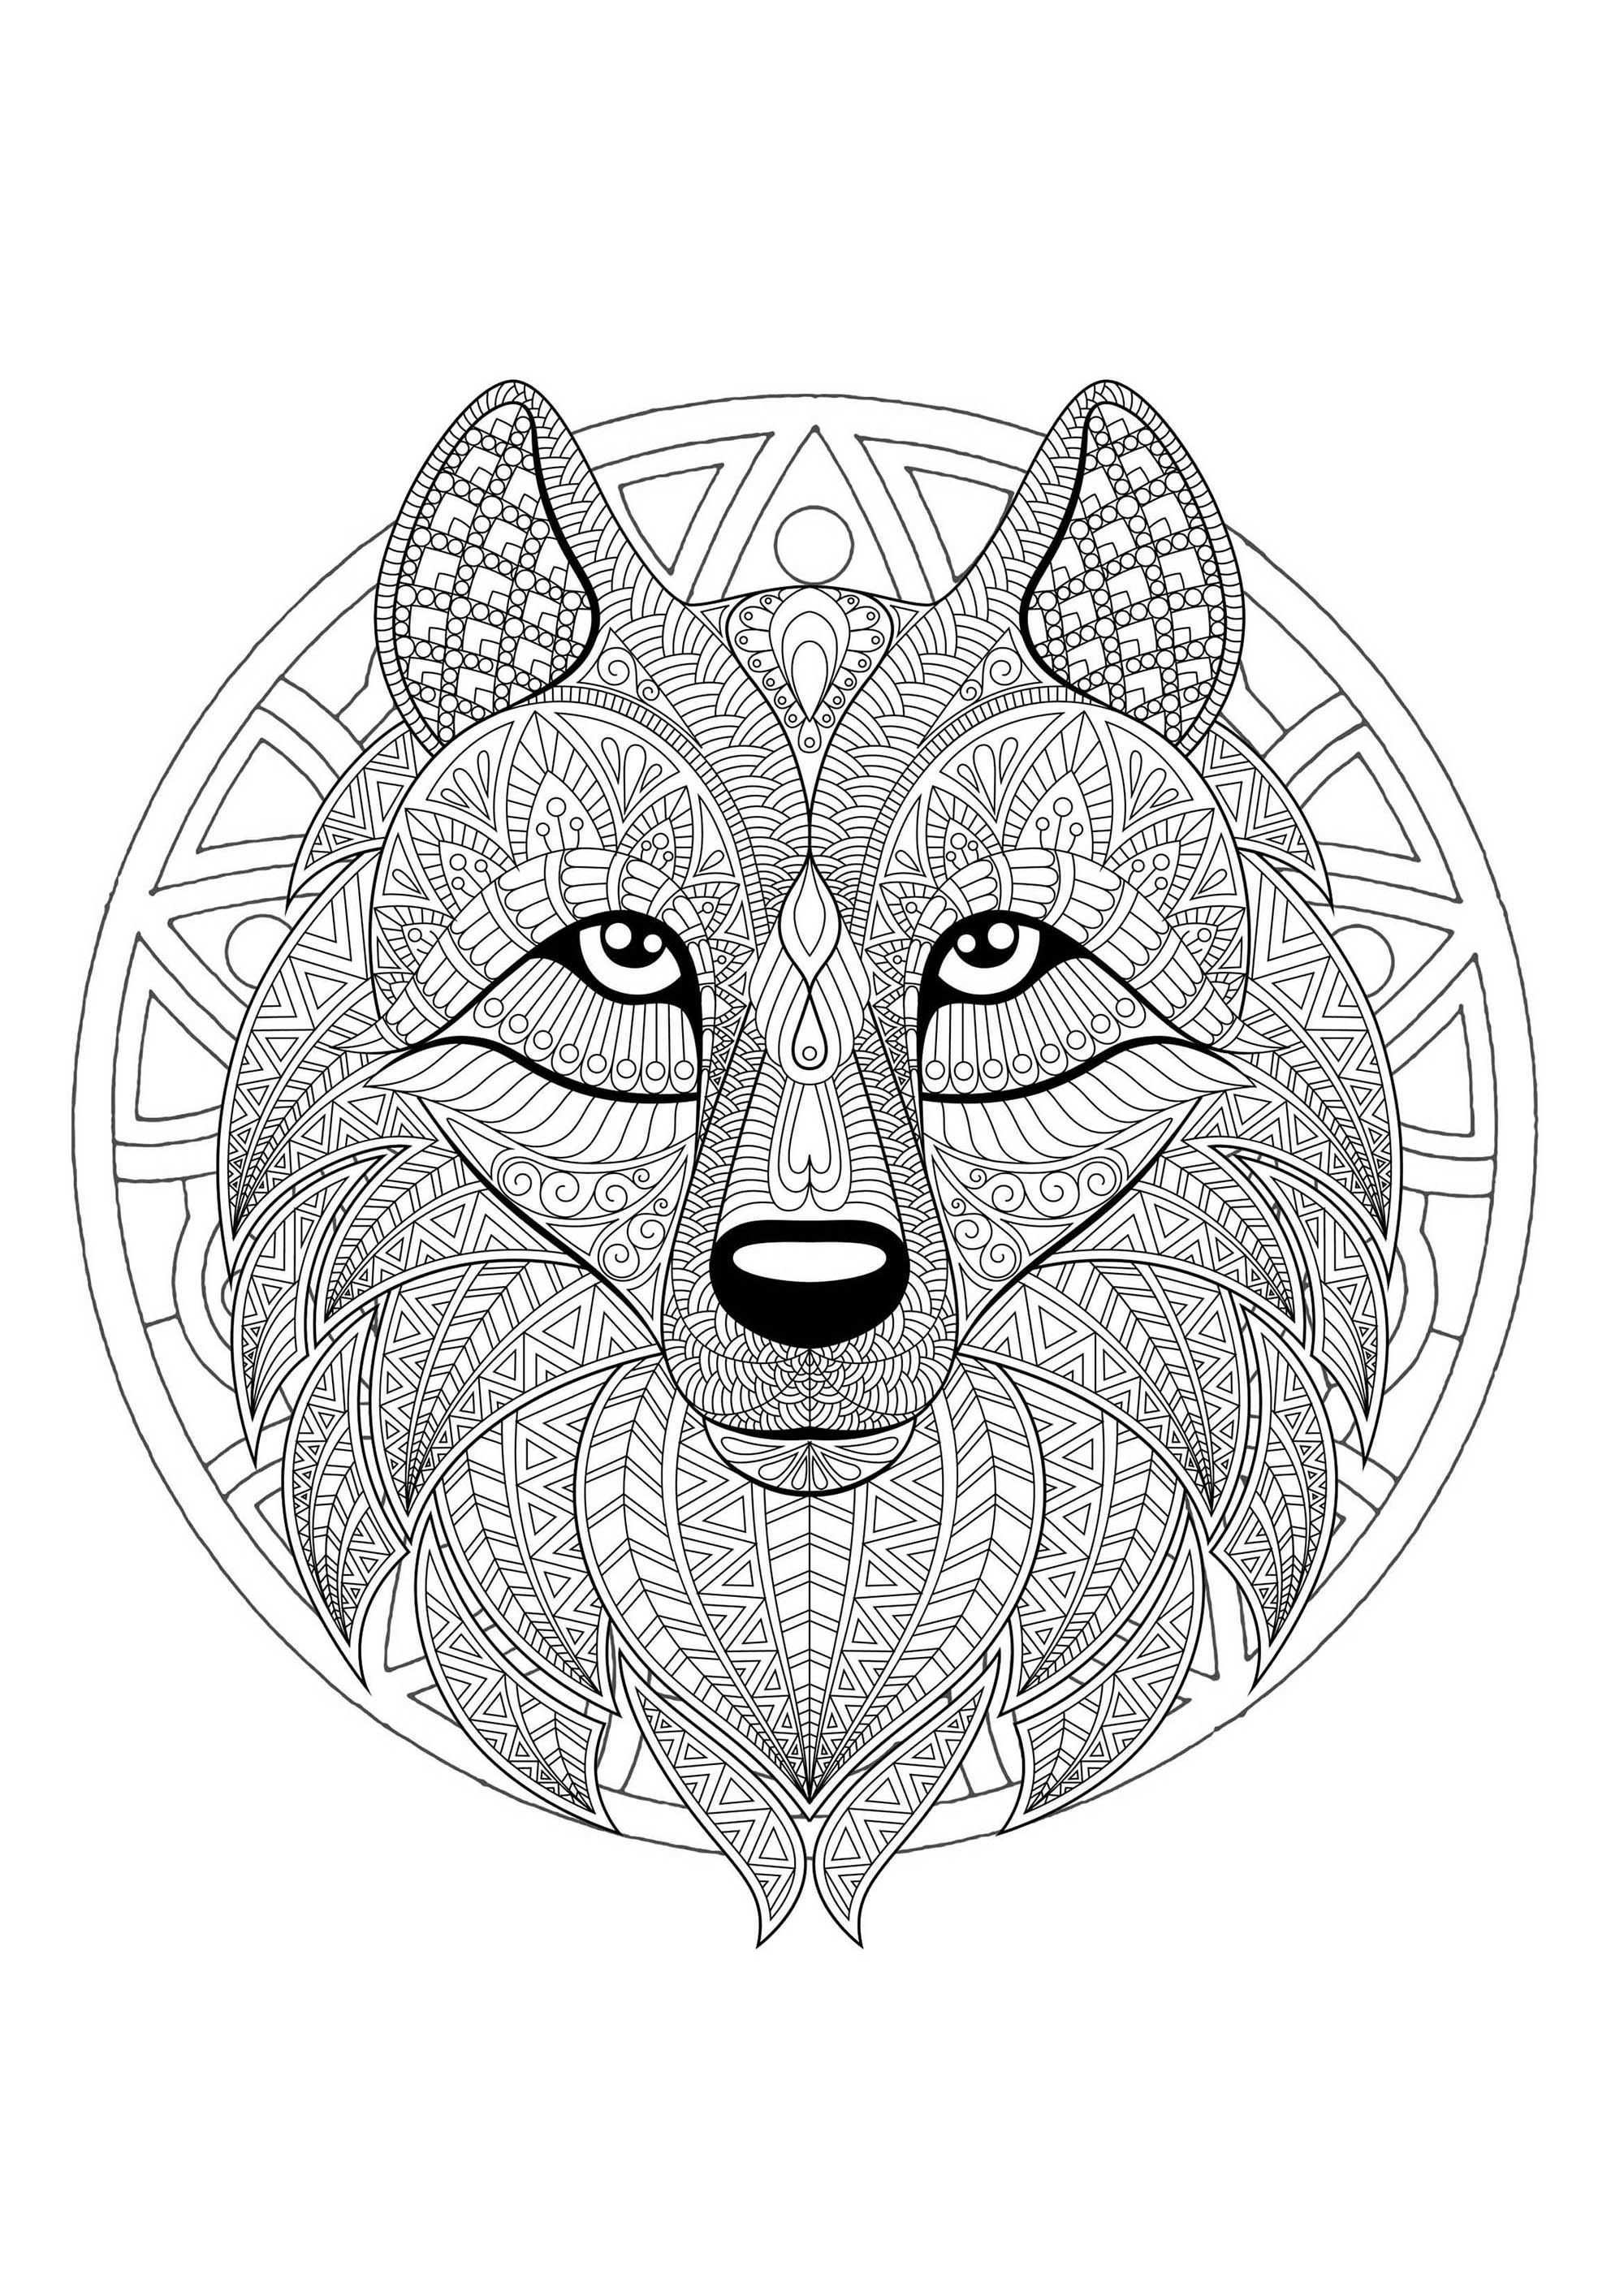 Mandala To Color With Patterns And Incredible Wolf Head Mandala Coloring Pages Mandal